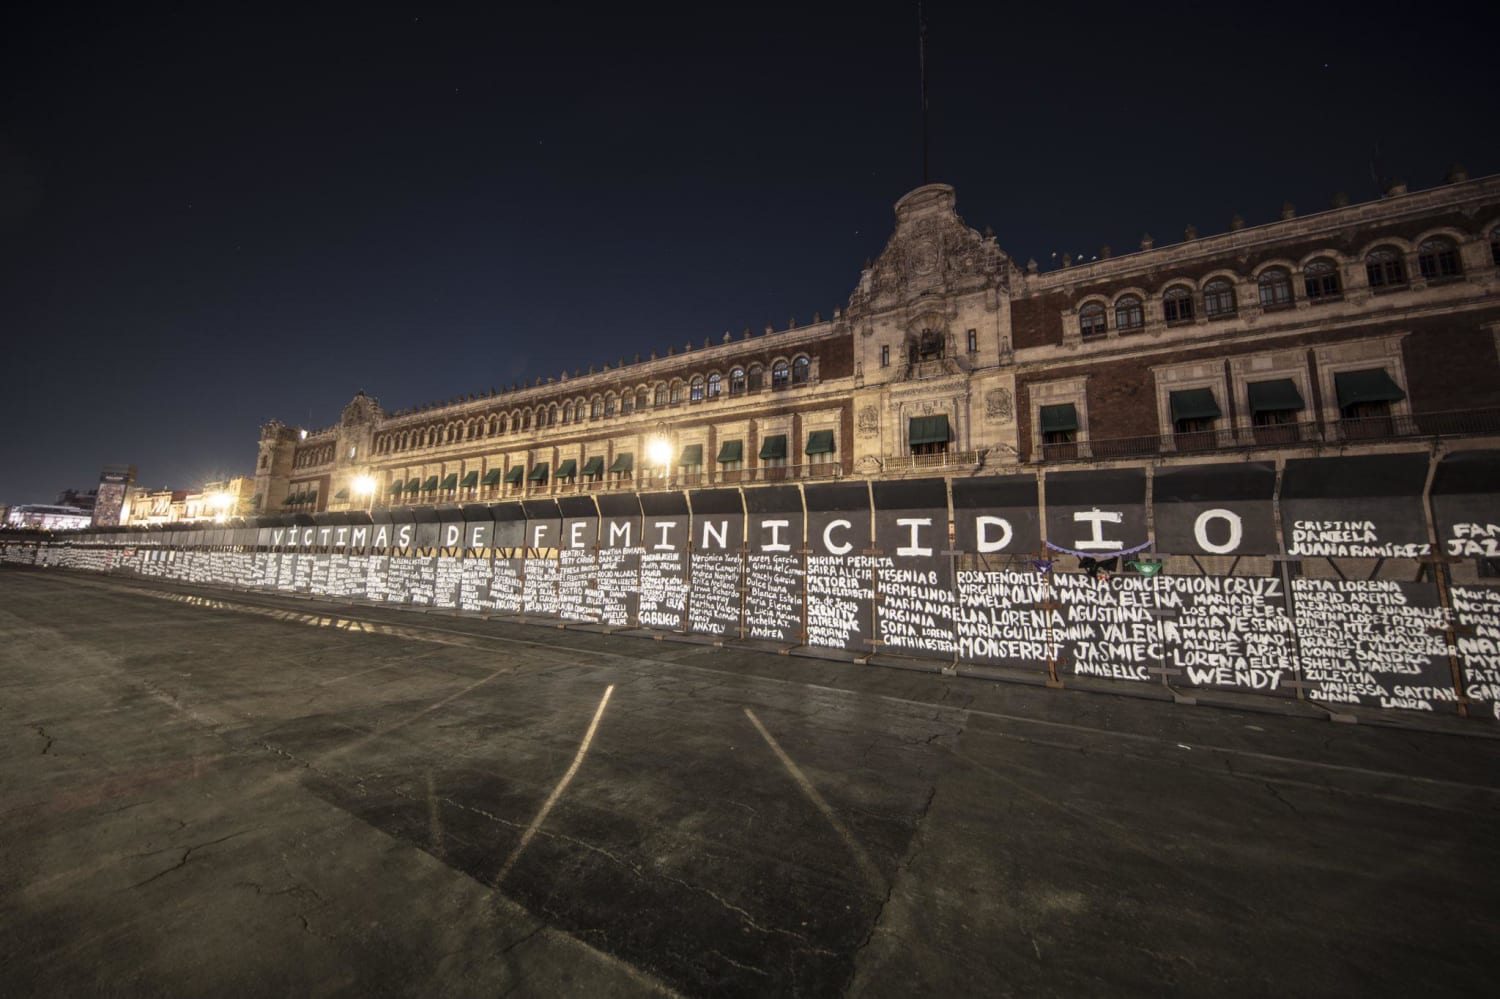 In Mexico City government put up this barriers to protect national palace ahead of feminists protests, so the feminists wrote the names of murdered women on them.